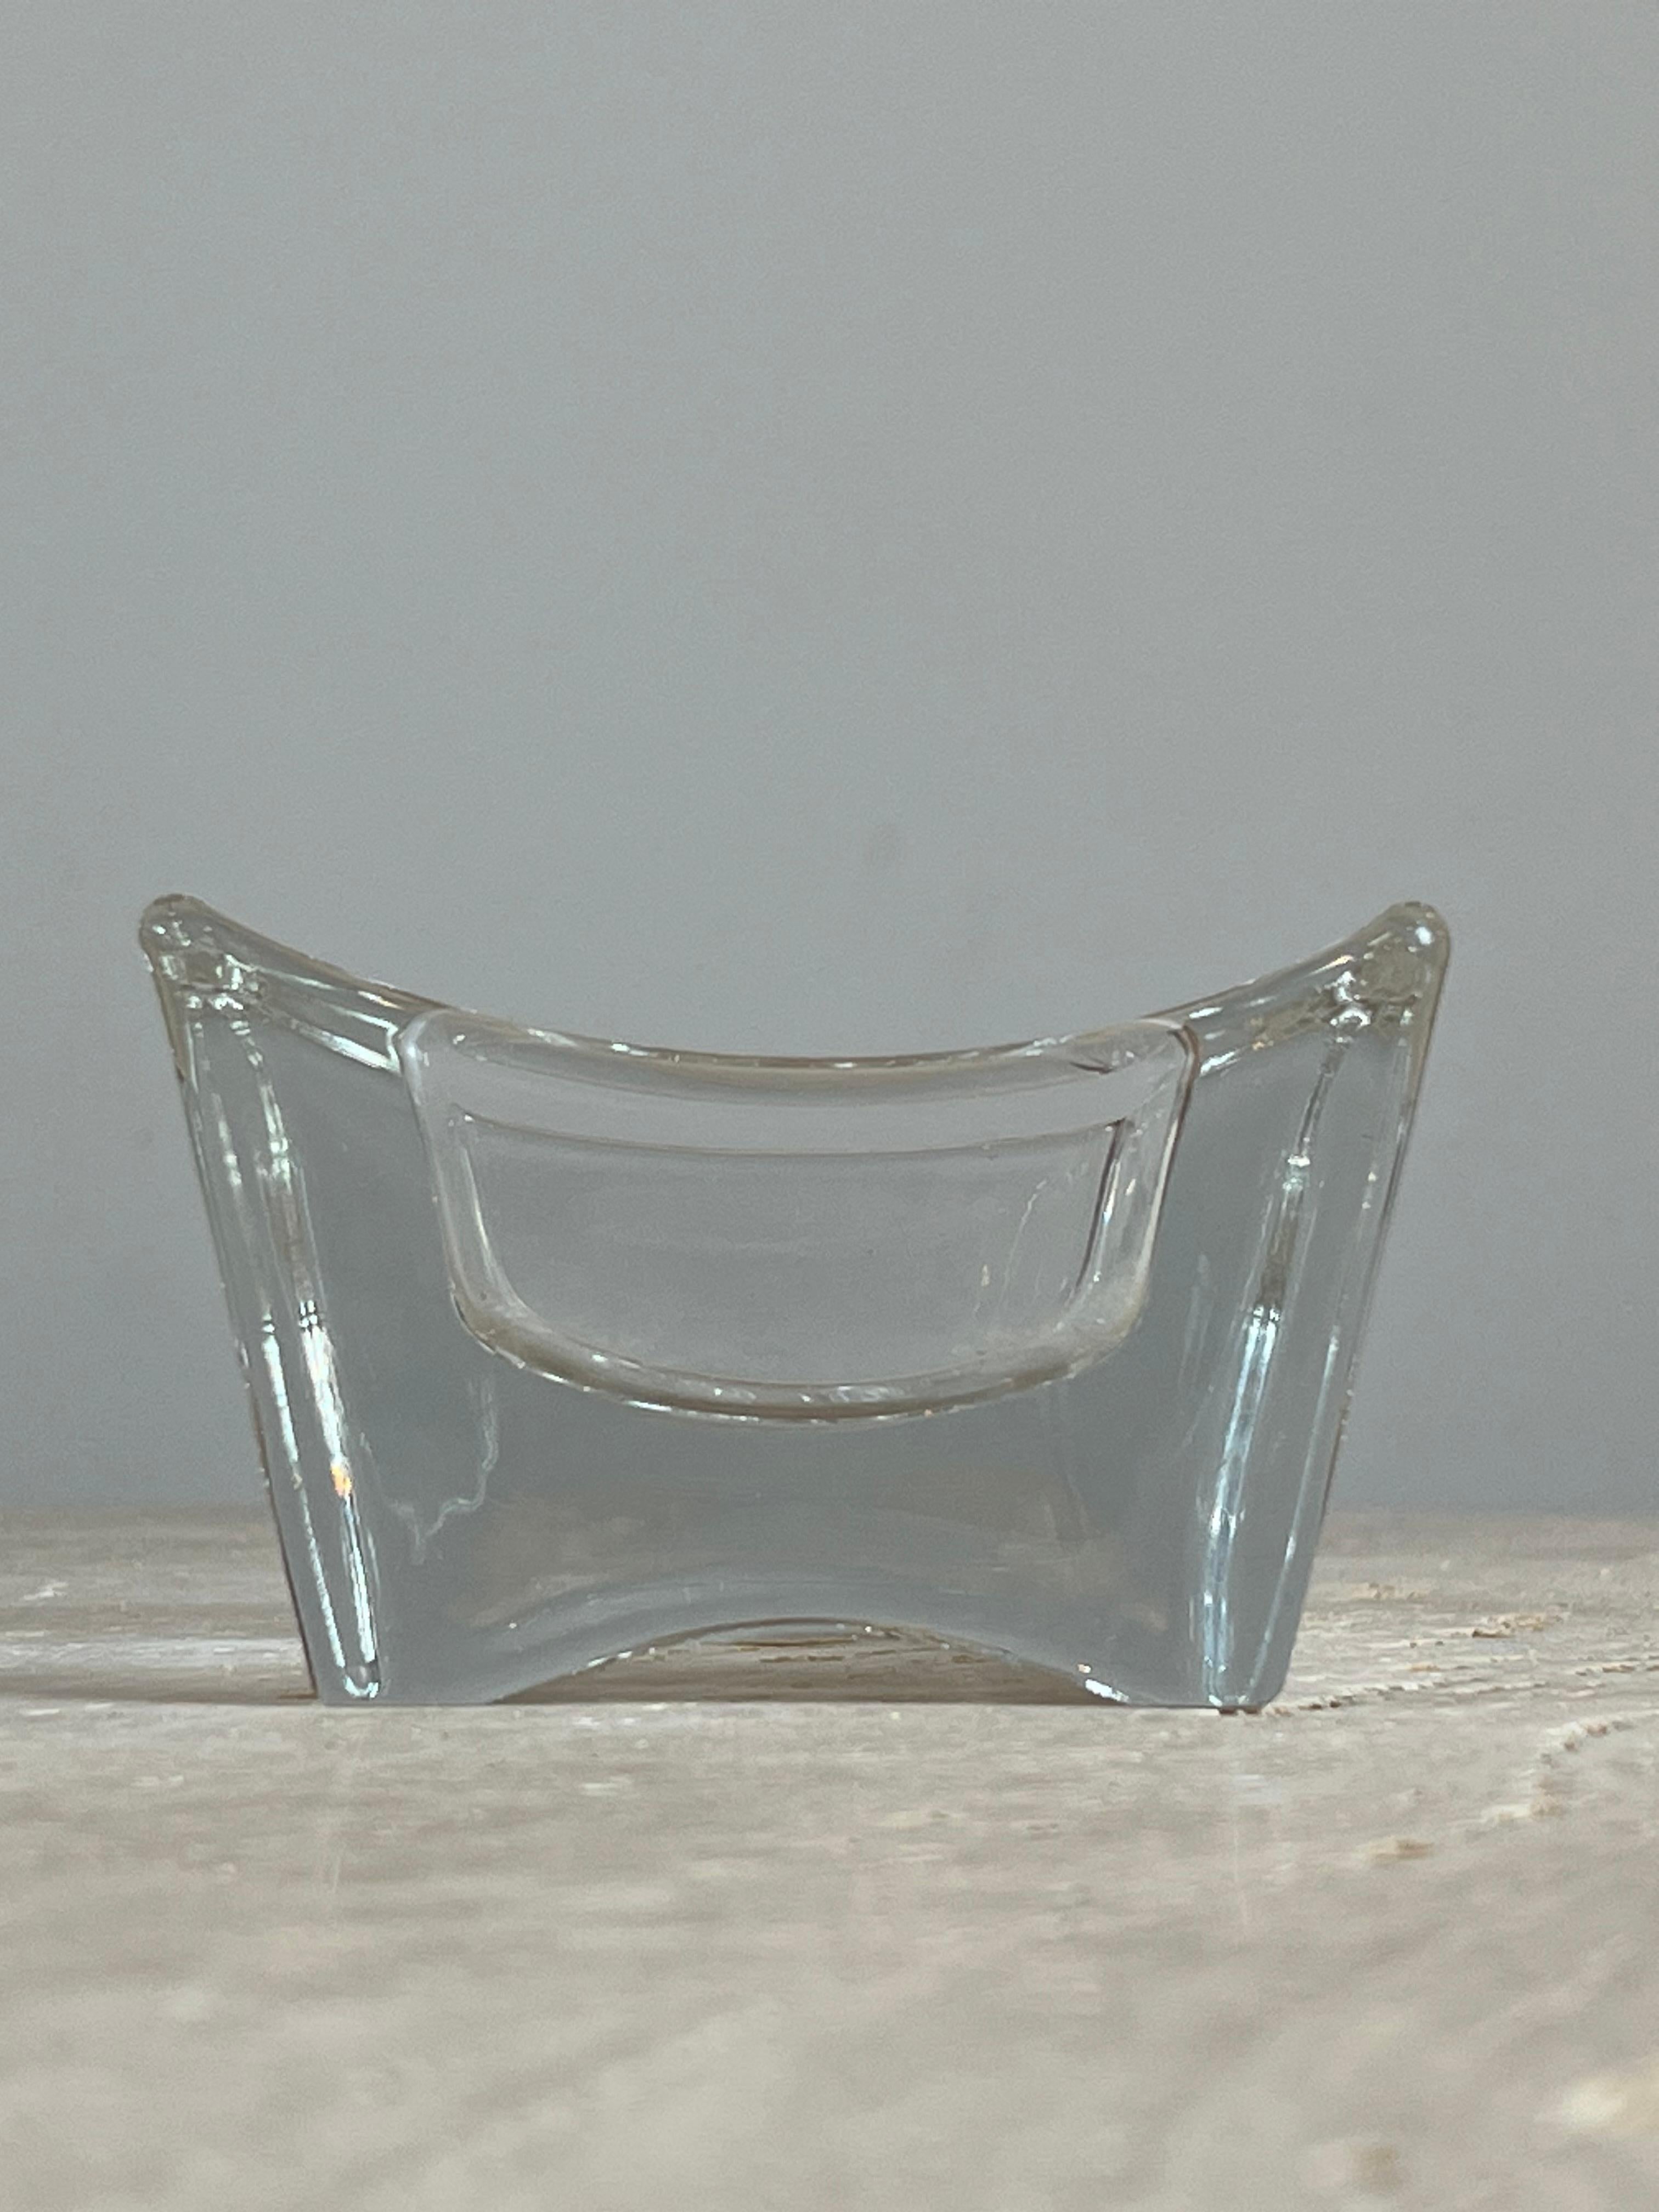 Glass ashtray with bevelled edges. 
The Thermor inscription is noted on one side.

In very good condition, with a patina consistent with age and use.